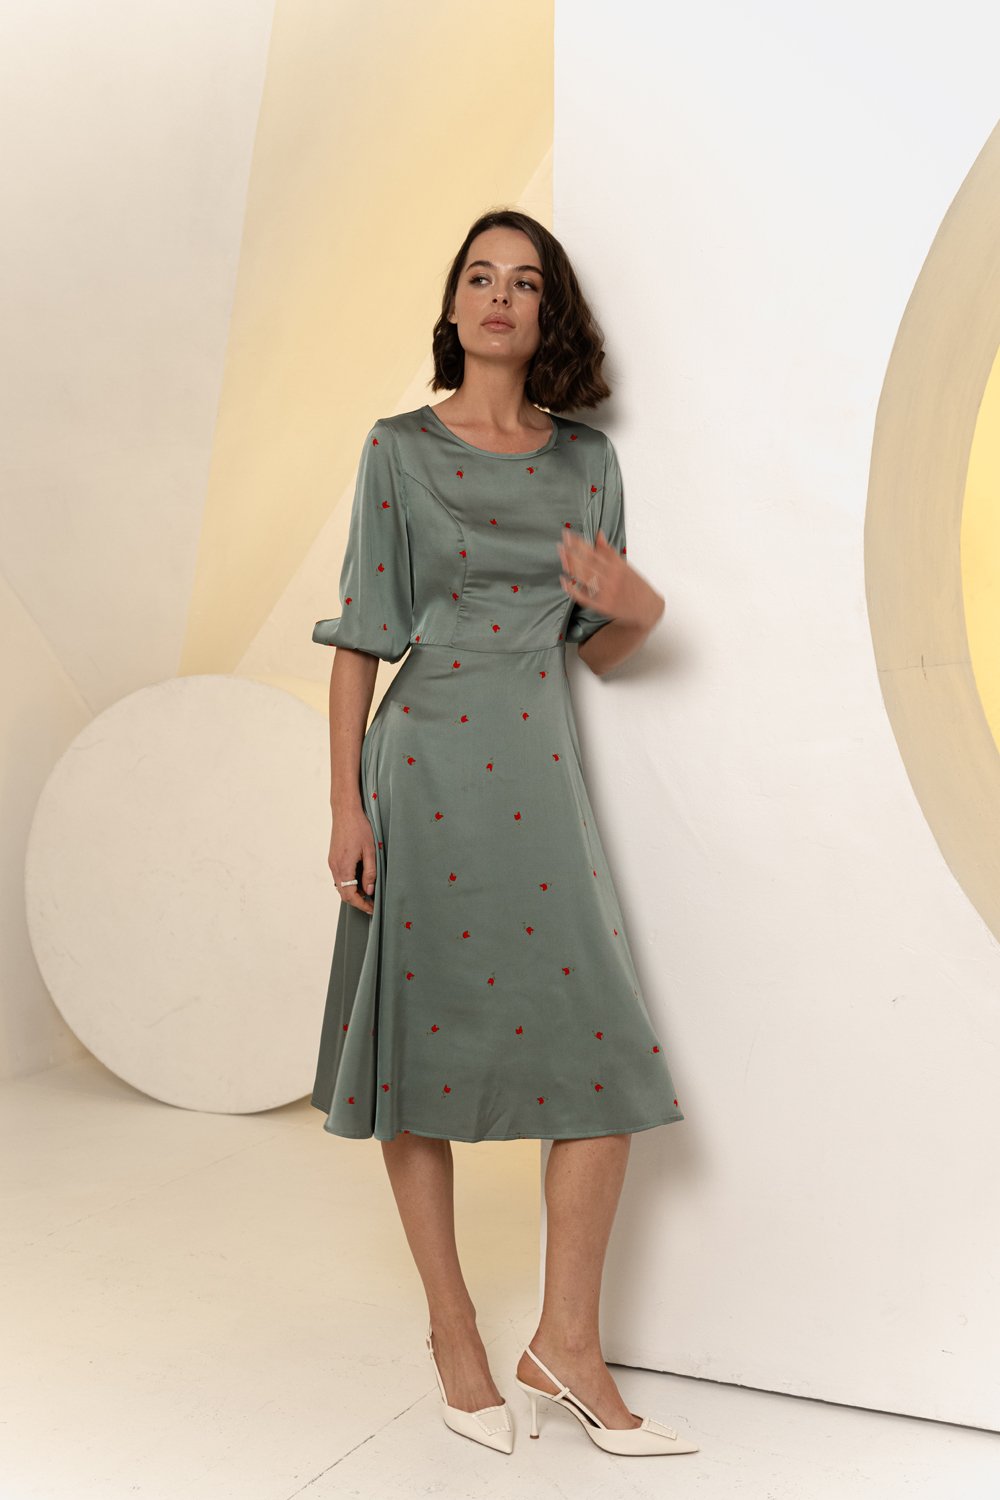 Semi-fitted midi dress with a loose skirt in emerald color